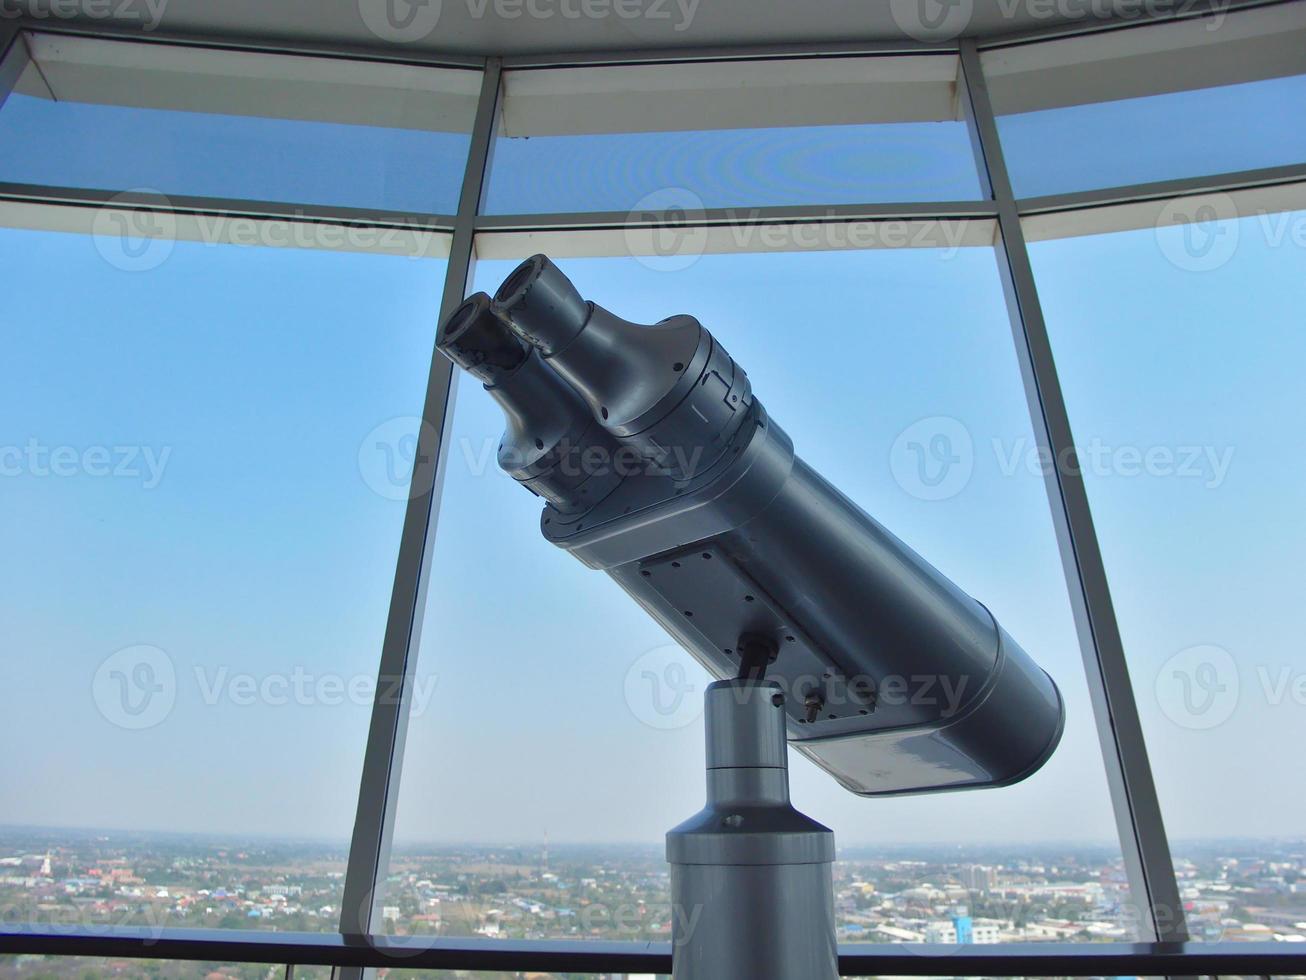 Large binoculars can be used for viewing views on tall buildings. photo